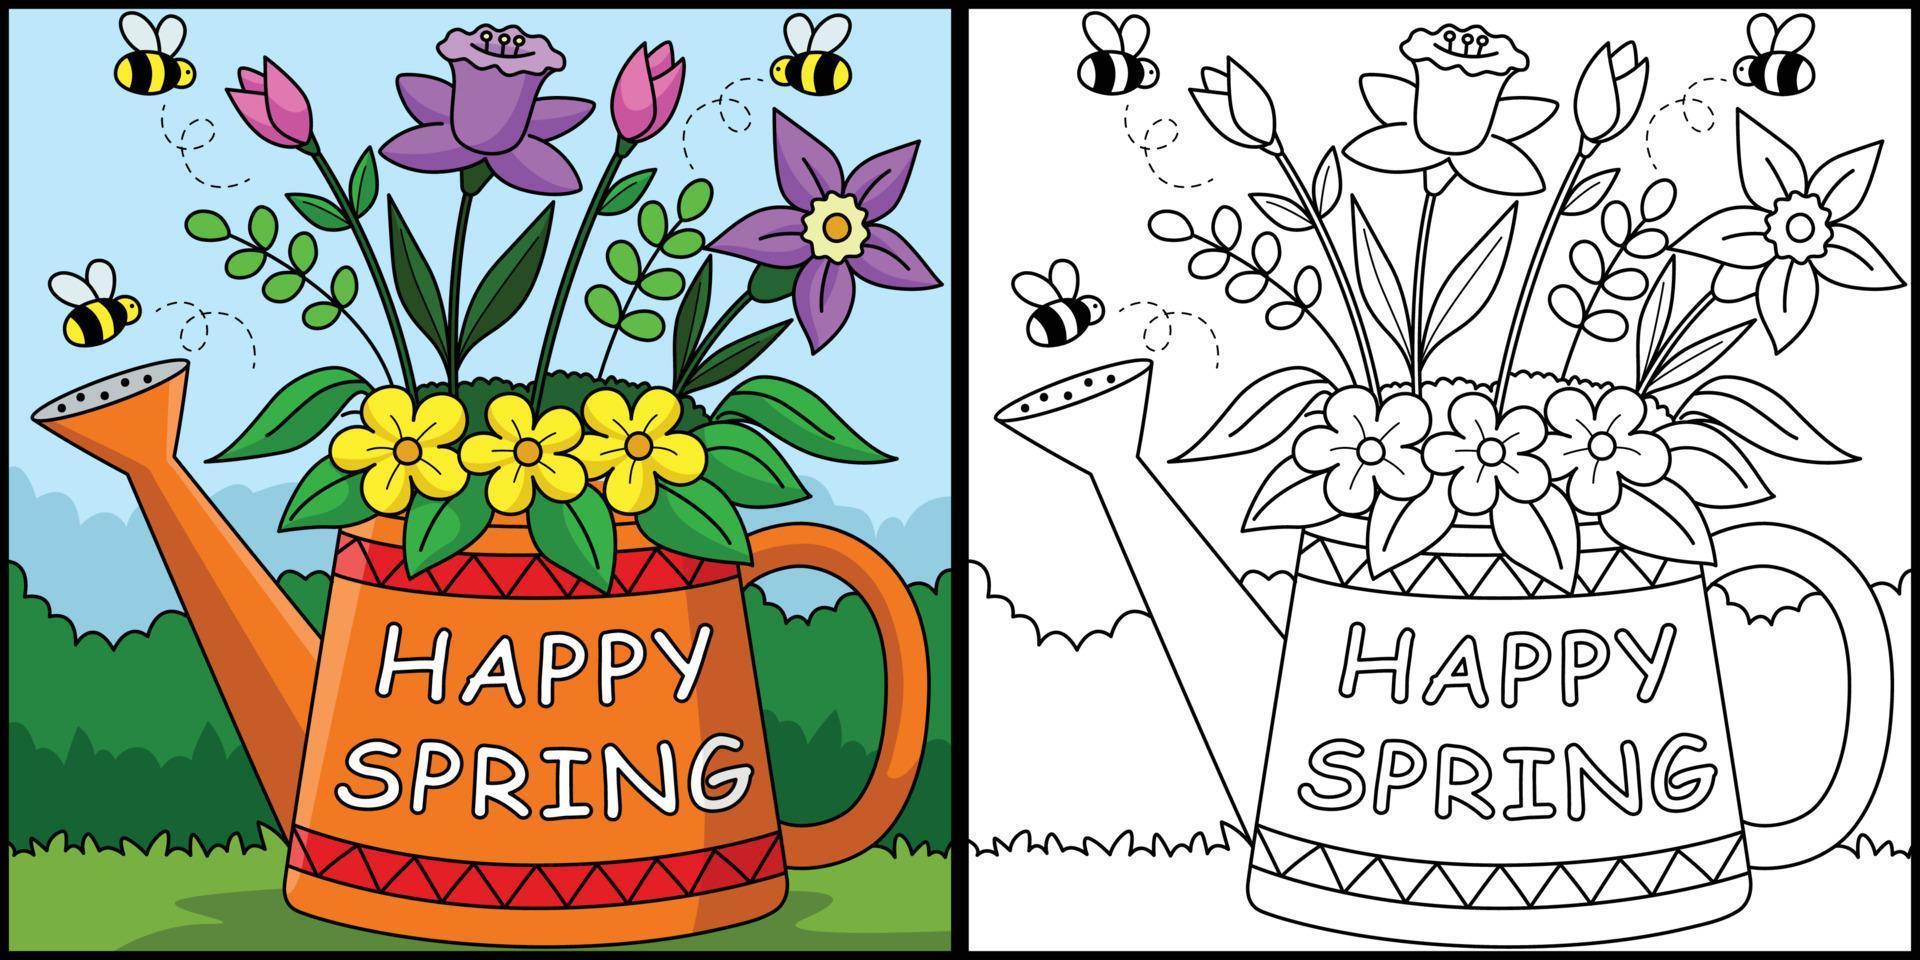 Happy Spring Flower Coloring Page Illustration vector